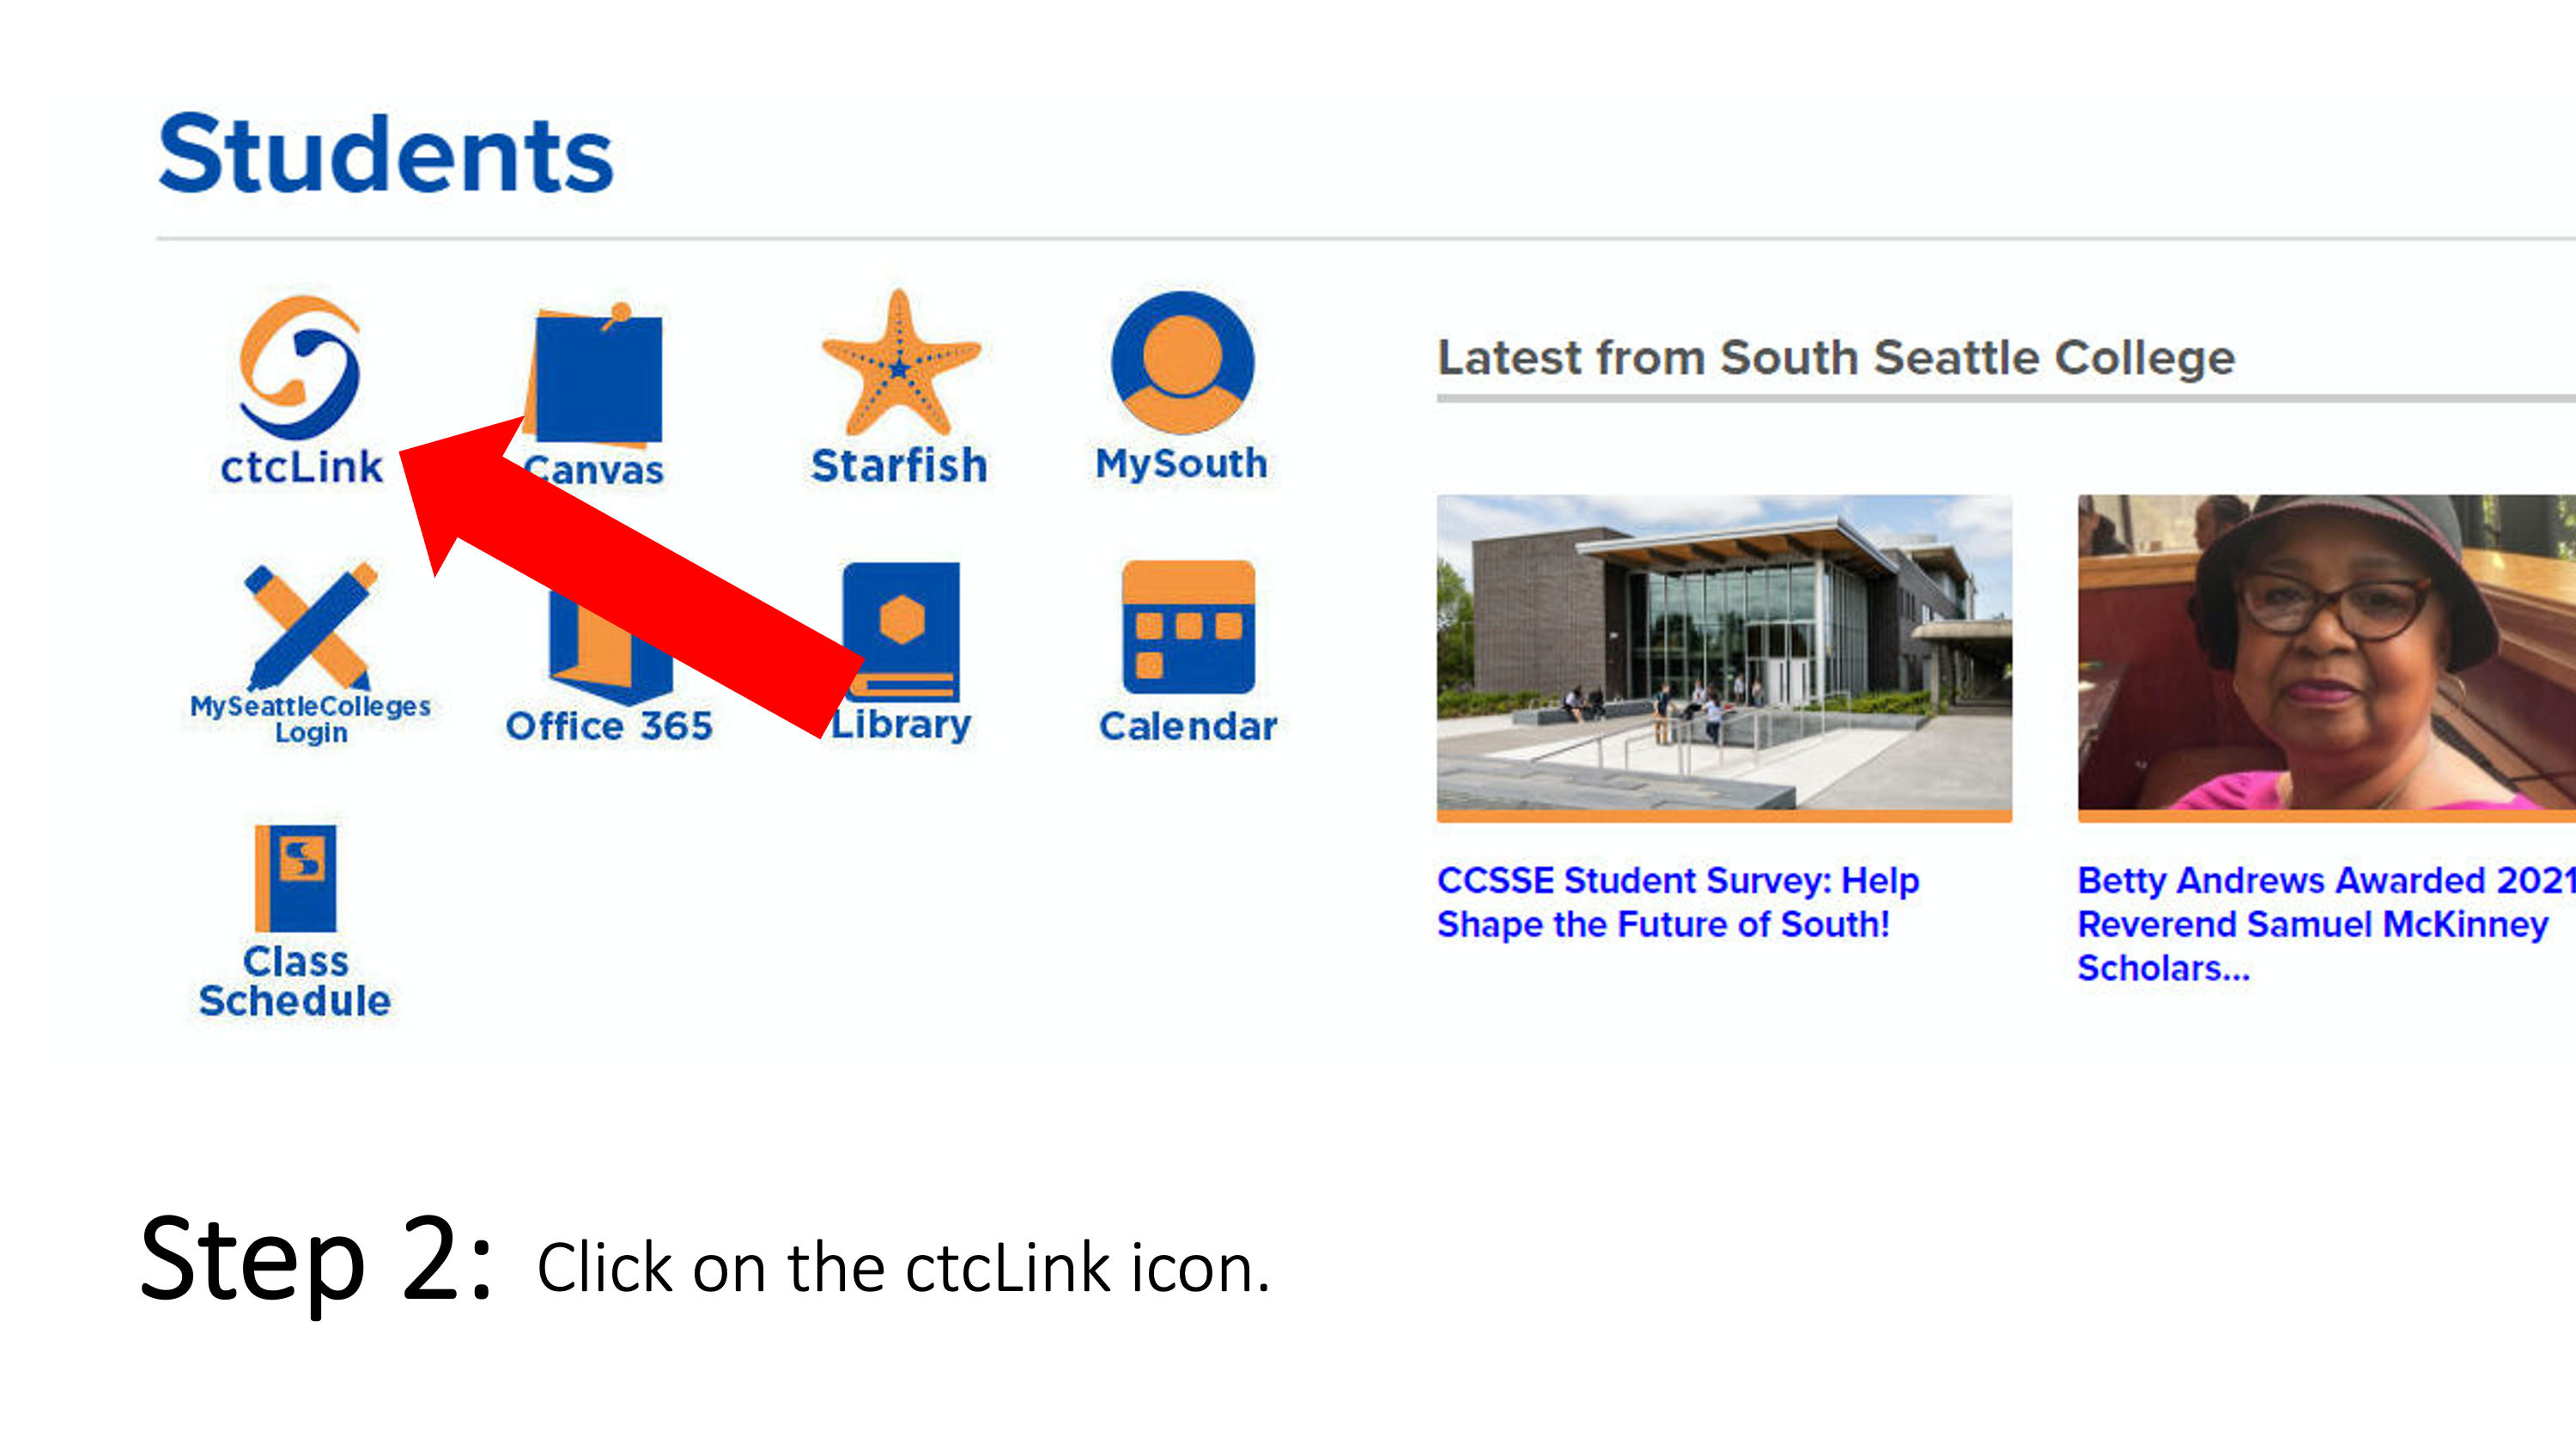 Click on the ctcLink icon on the Students page.